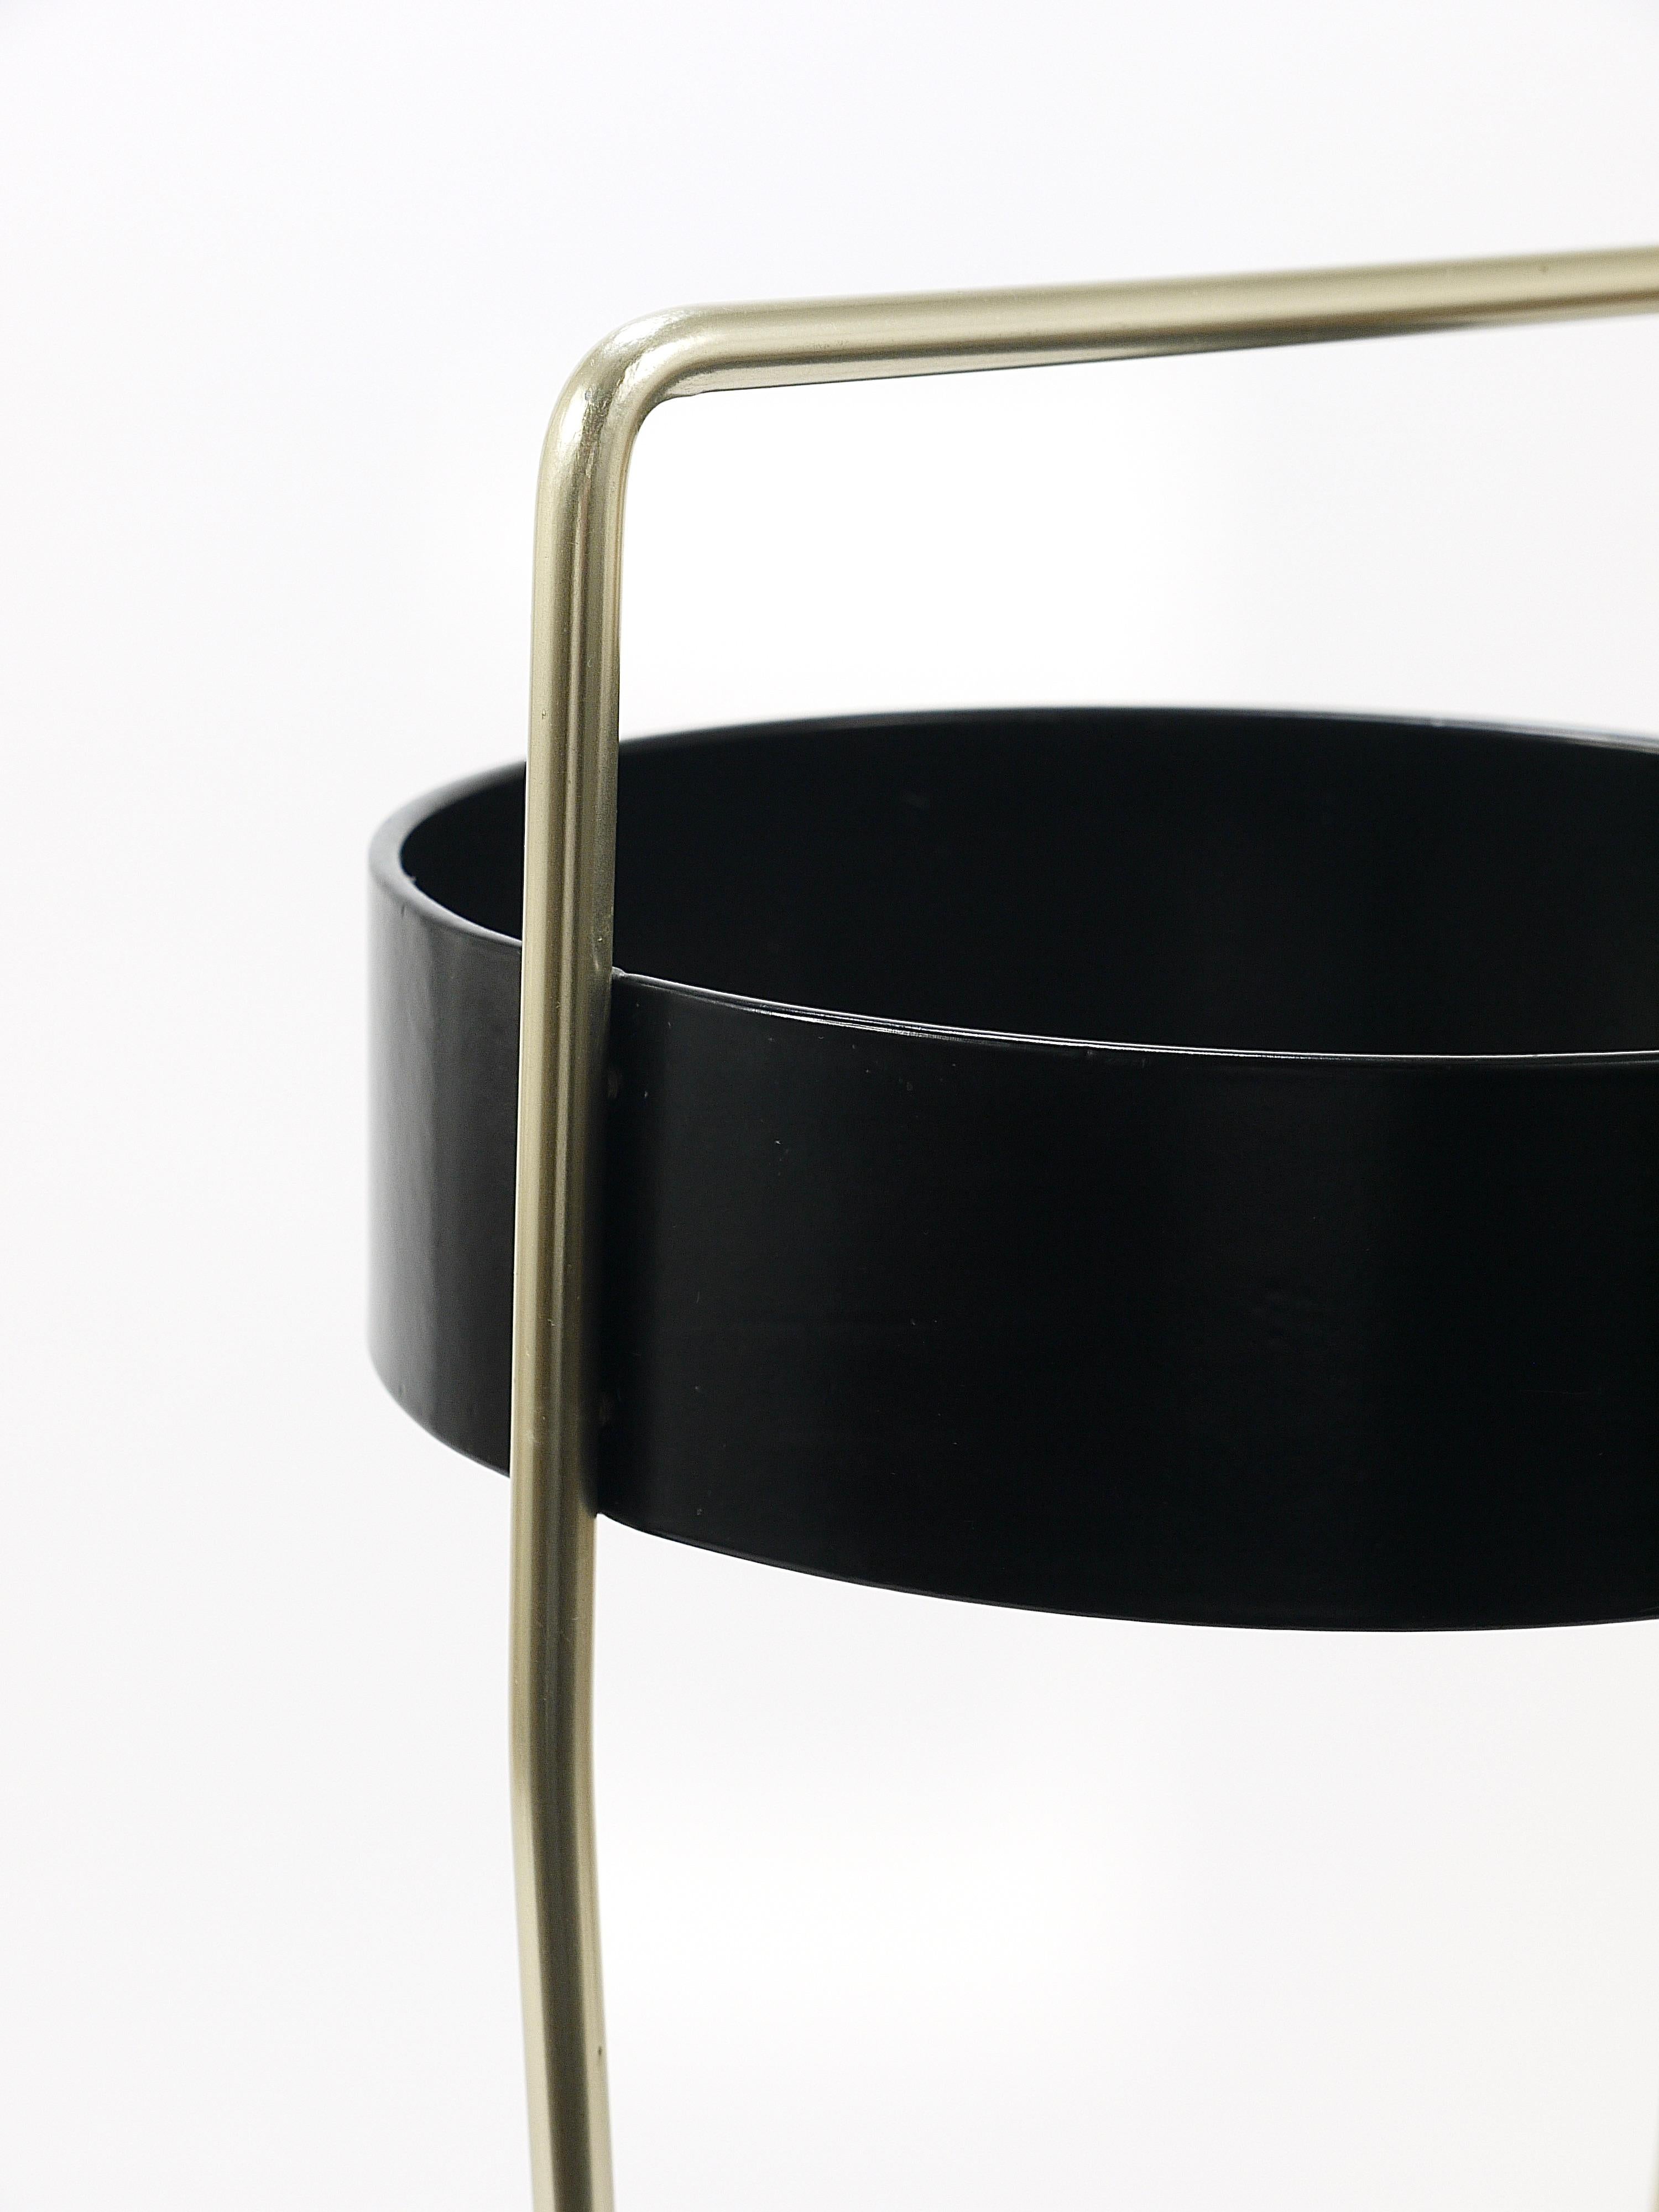 We are pleased to offer the pictured mid-century umbrella stand / holder. It dates from the 1970s and was designed by Carl Auböck III and handcrafted by the Werkstätte Auböck in Vienna. The umbrella stand features Auböck's characteristic minimalist